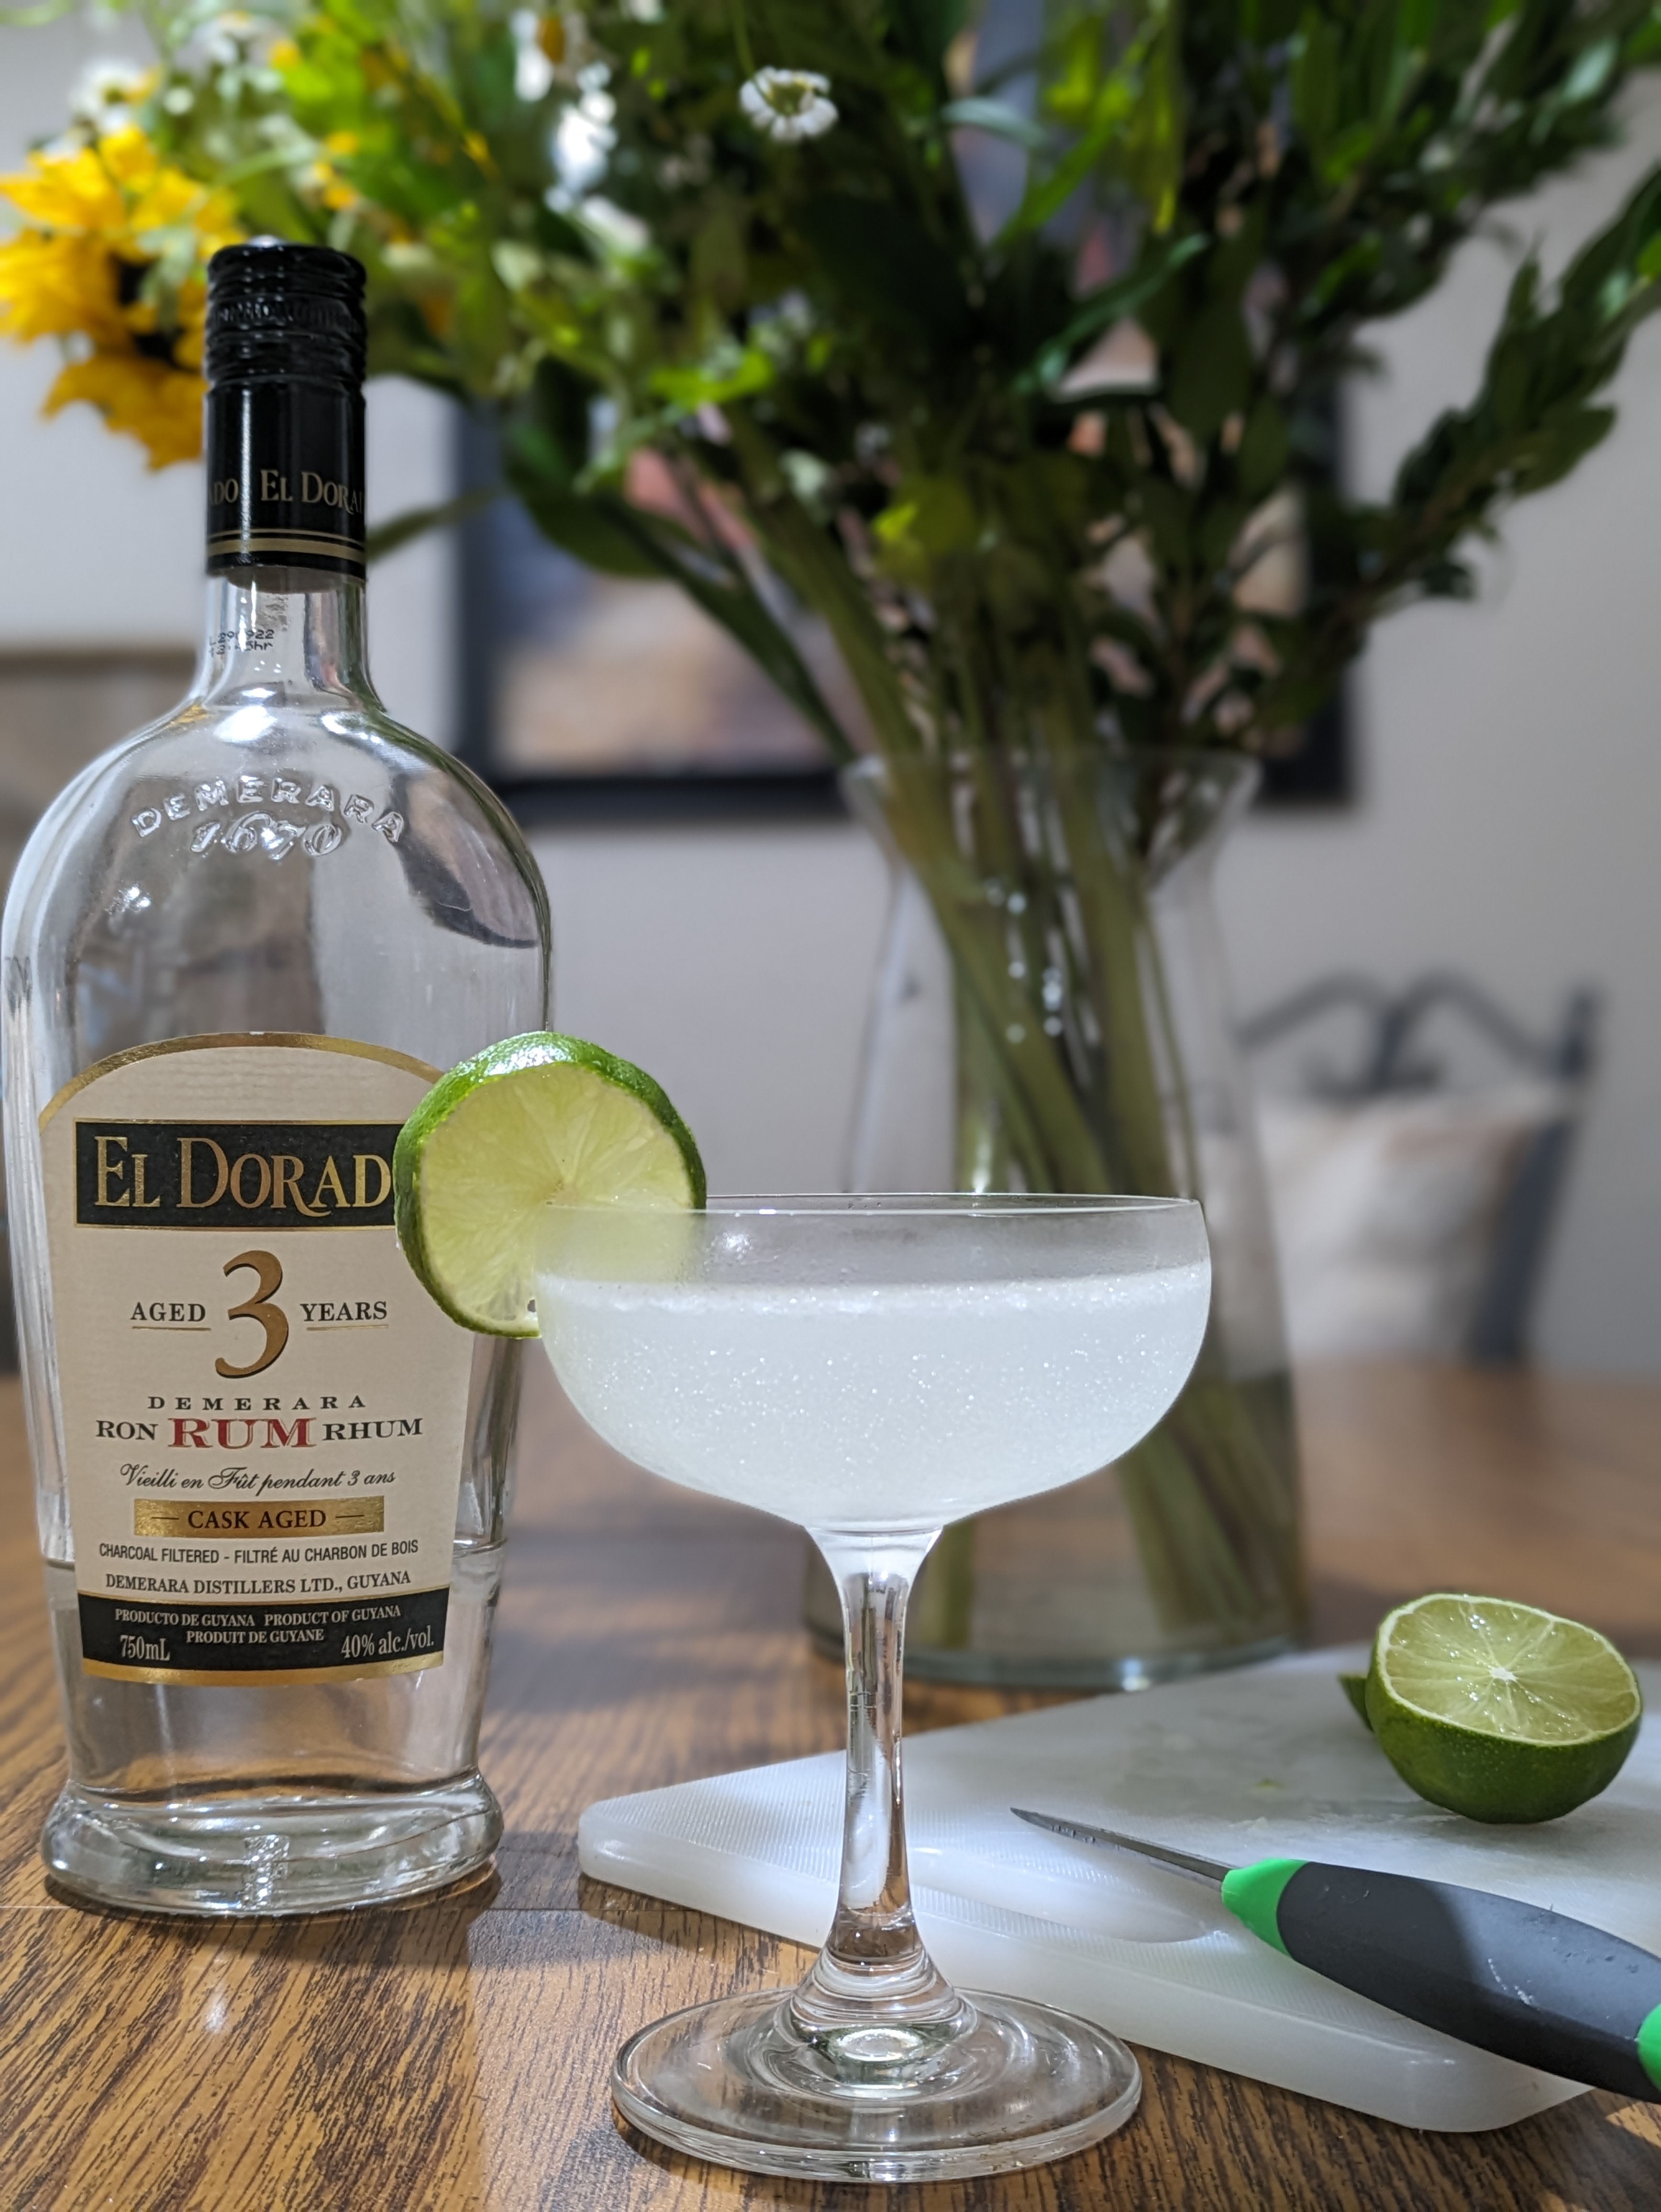 A bottle of El Dorado rum and a cutting board with half a lime stand behind a glass containing a pale liquid and garnished with a lime wheel.